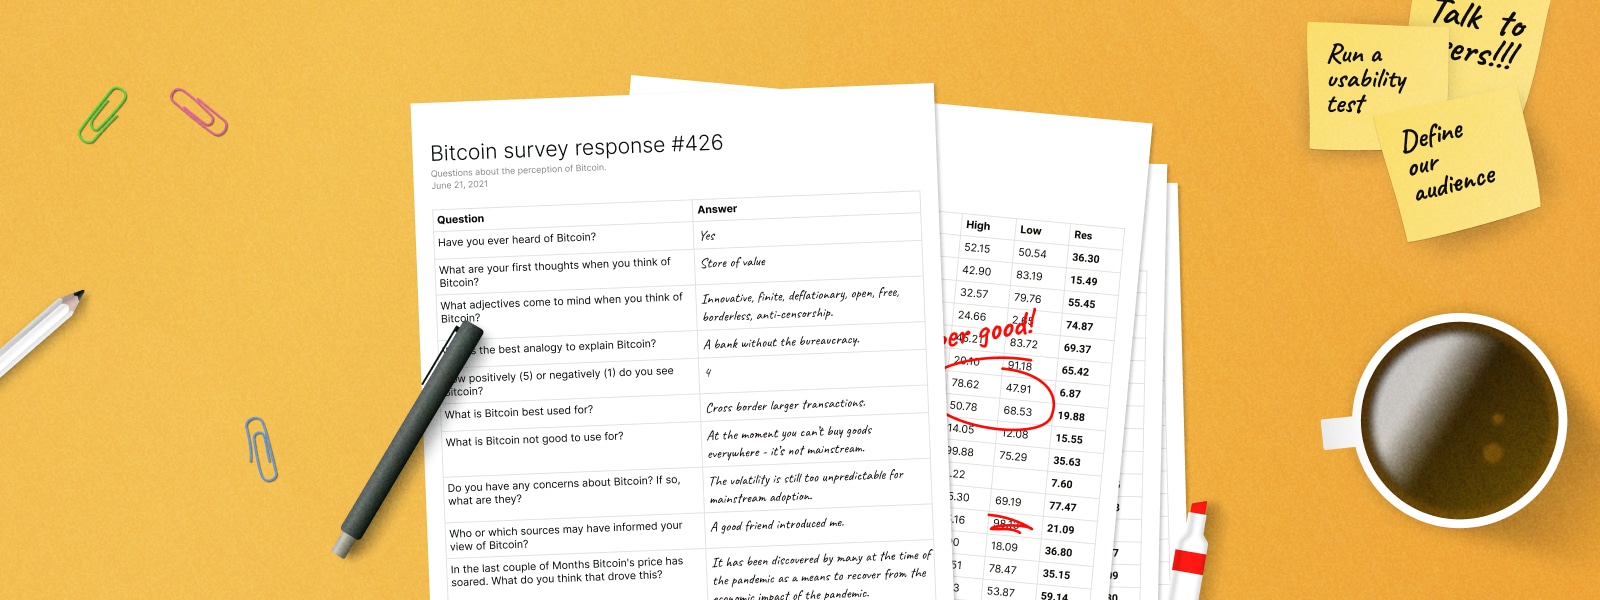 Printed bitcoin survey results on a desk